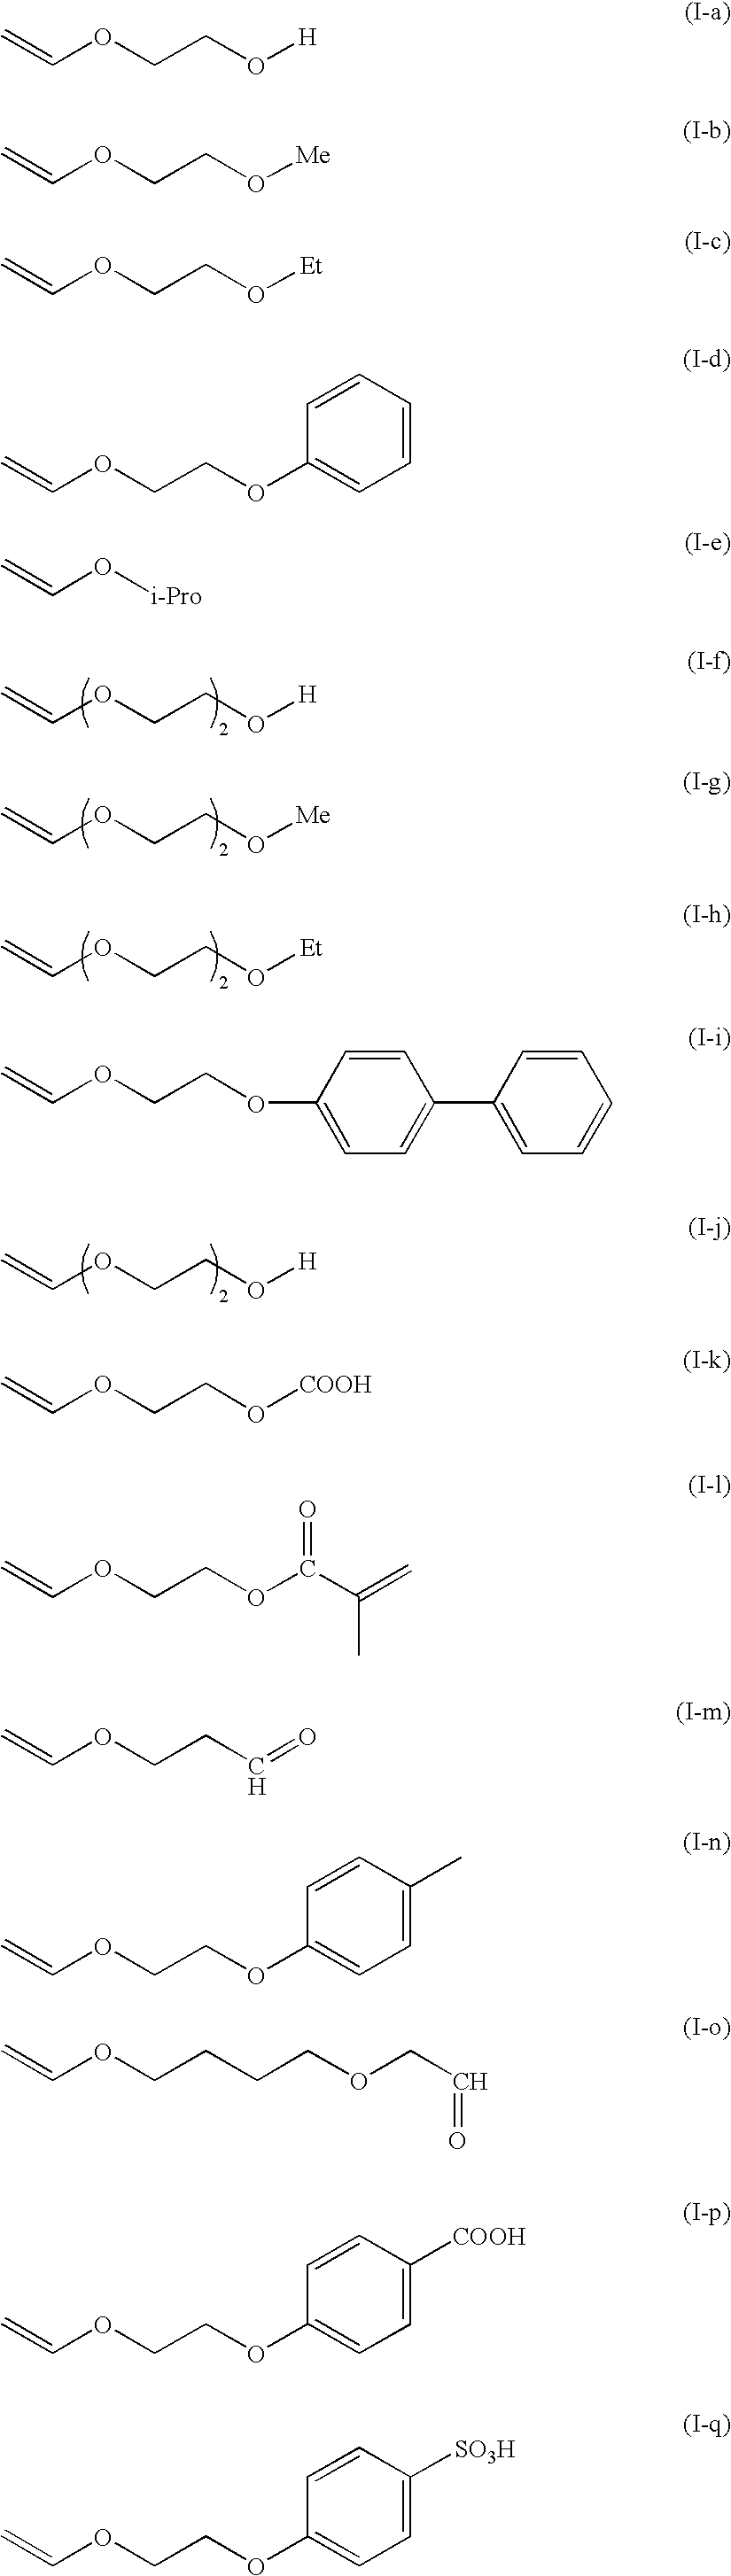 Novel polymer compound, composition containing the compound, ink composition, ink-applying method, and ink-applying apparatus